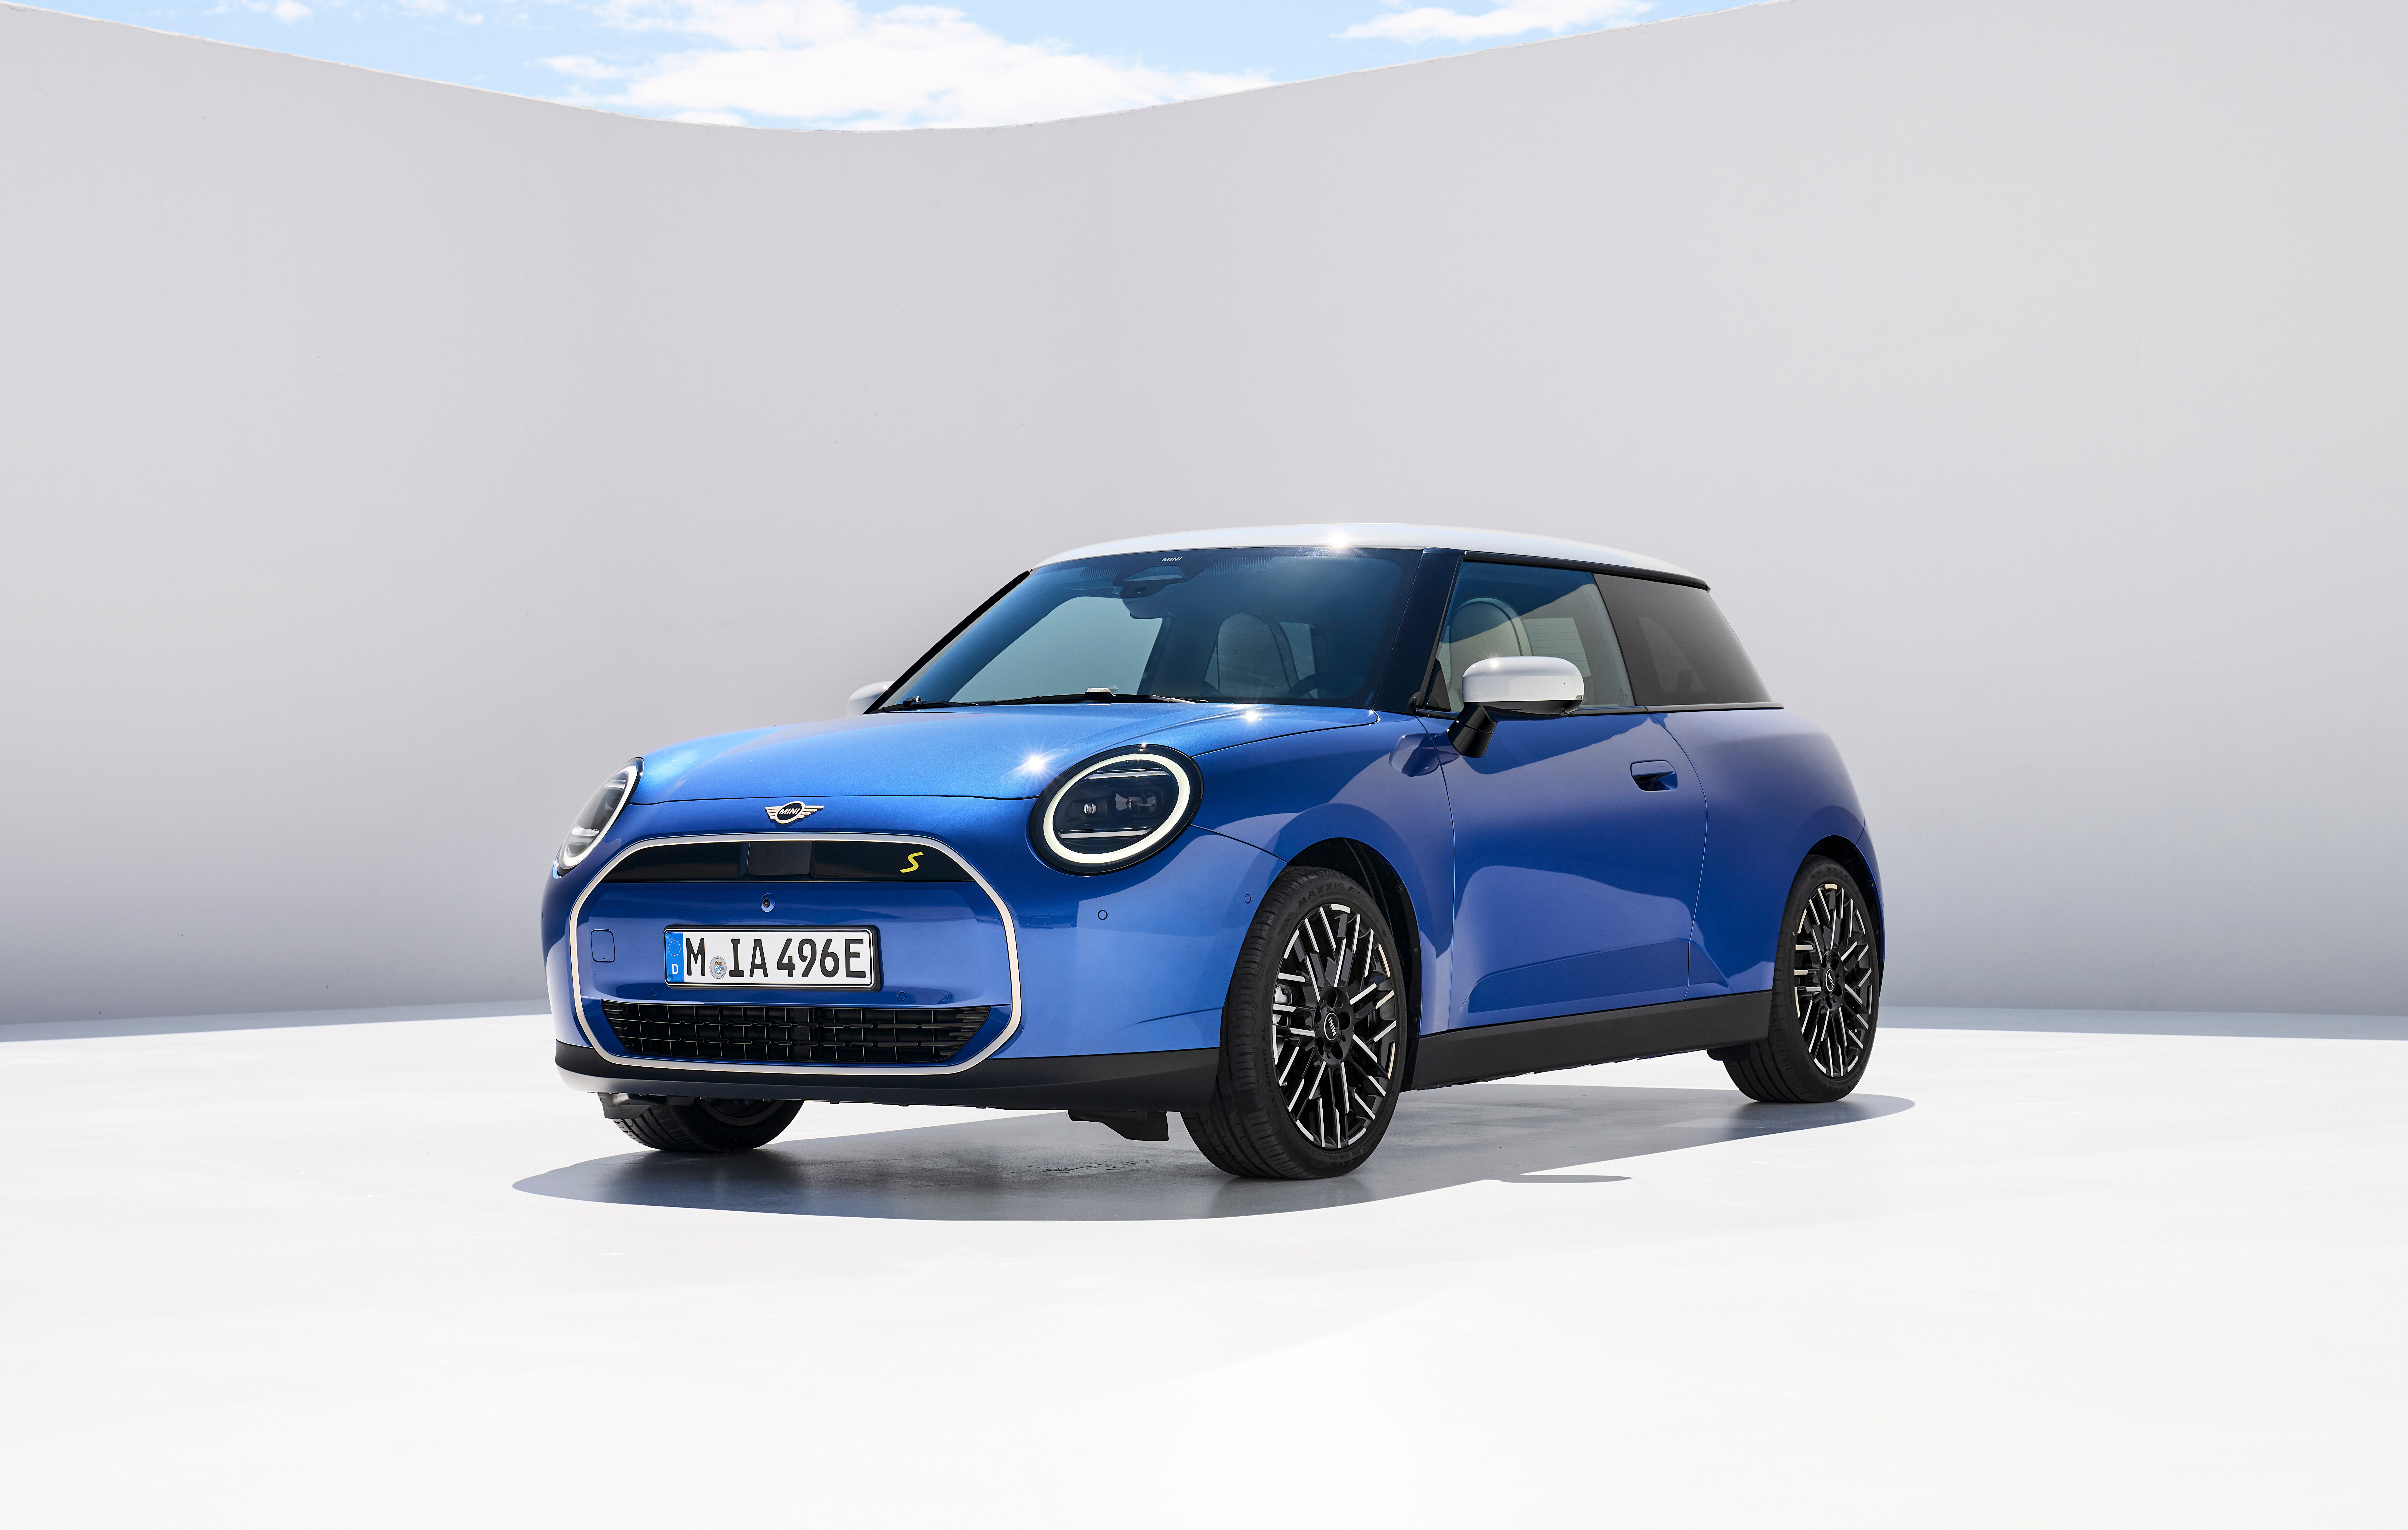 The Mini Cooper Electric gets a brand new look and up to 250 miles of range